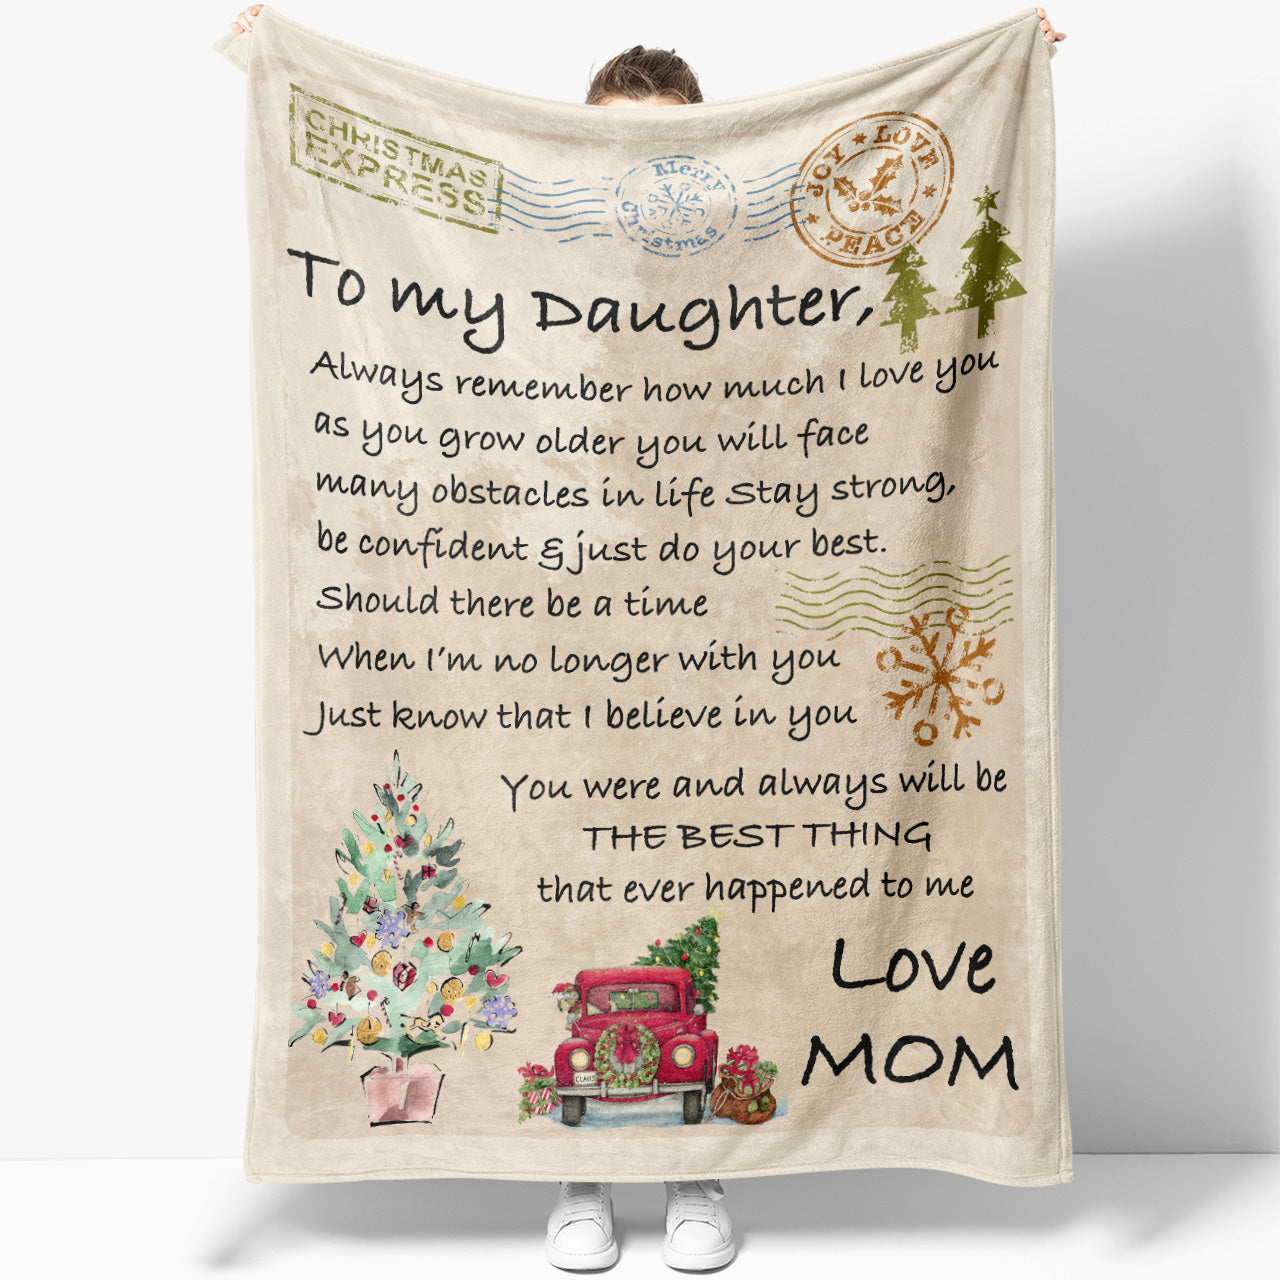 Mom Christmas Gift from Daughter, Gift for Mom from Daughter for Christmas, Christmas Gift for Mom from Daughters, Mom Gifts